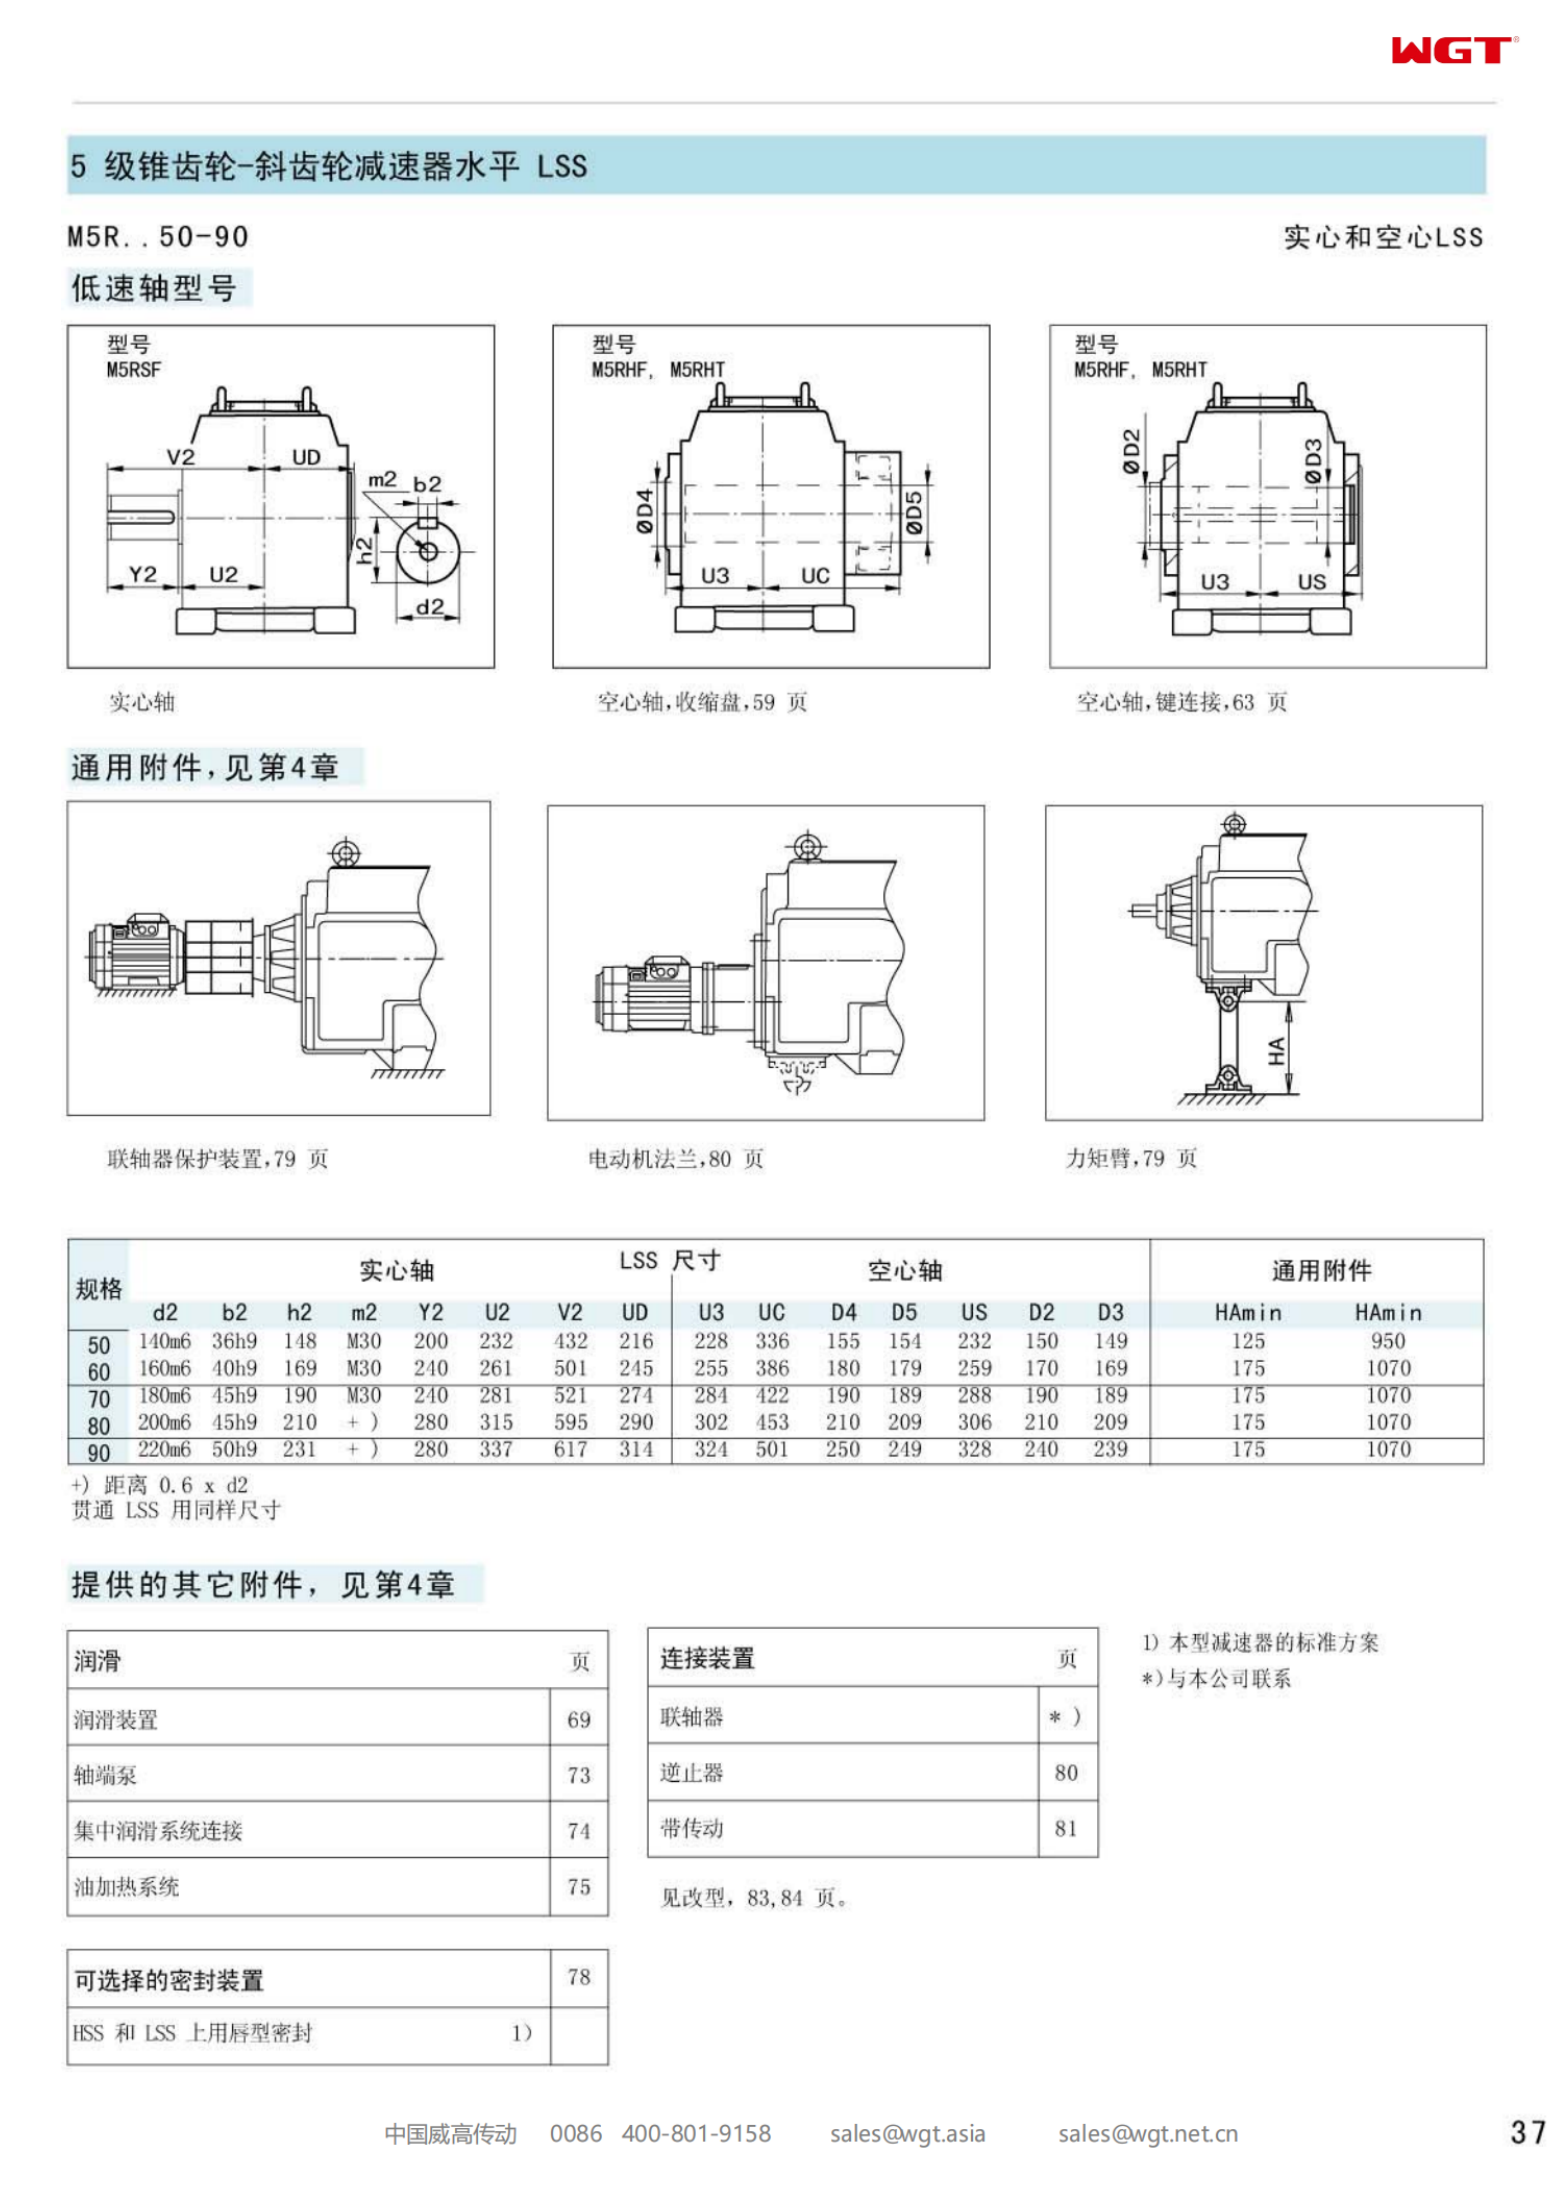 M5RSF90 Replace_SEW_M_Series Gearbox